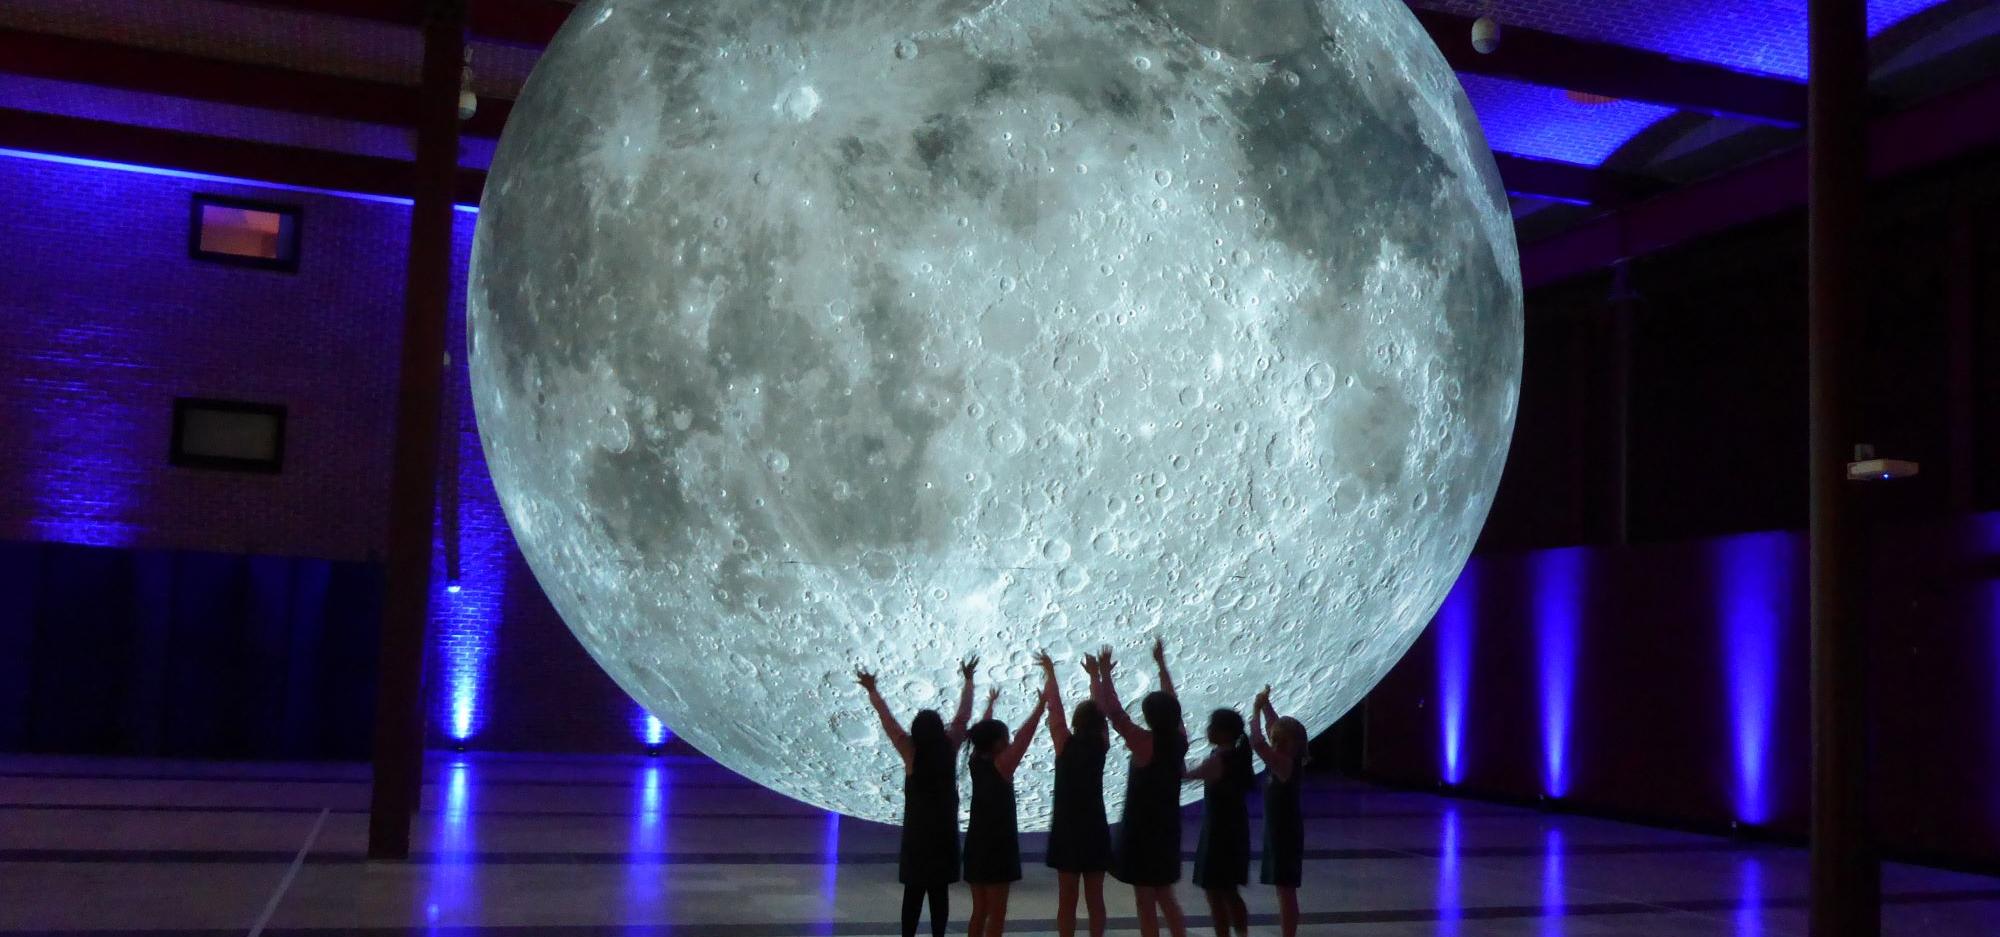 A large moon sits centrally in a room with a group of children reaching out to touch it